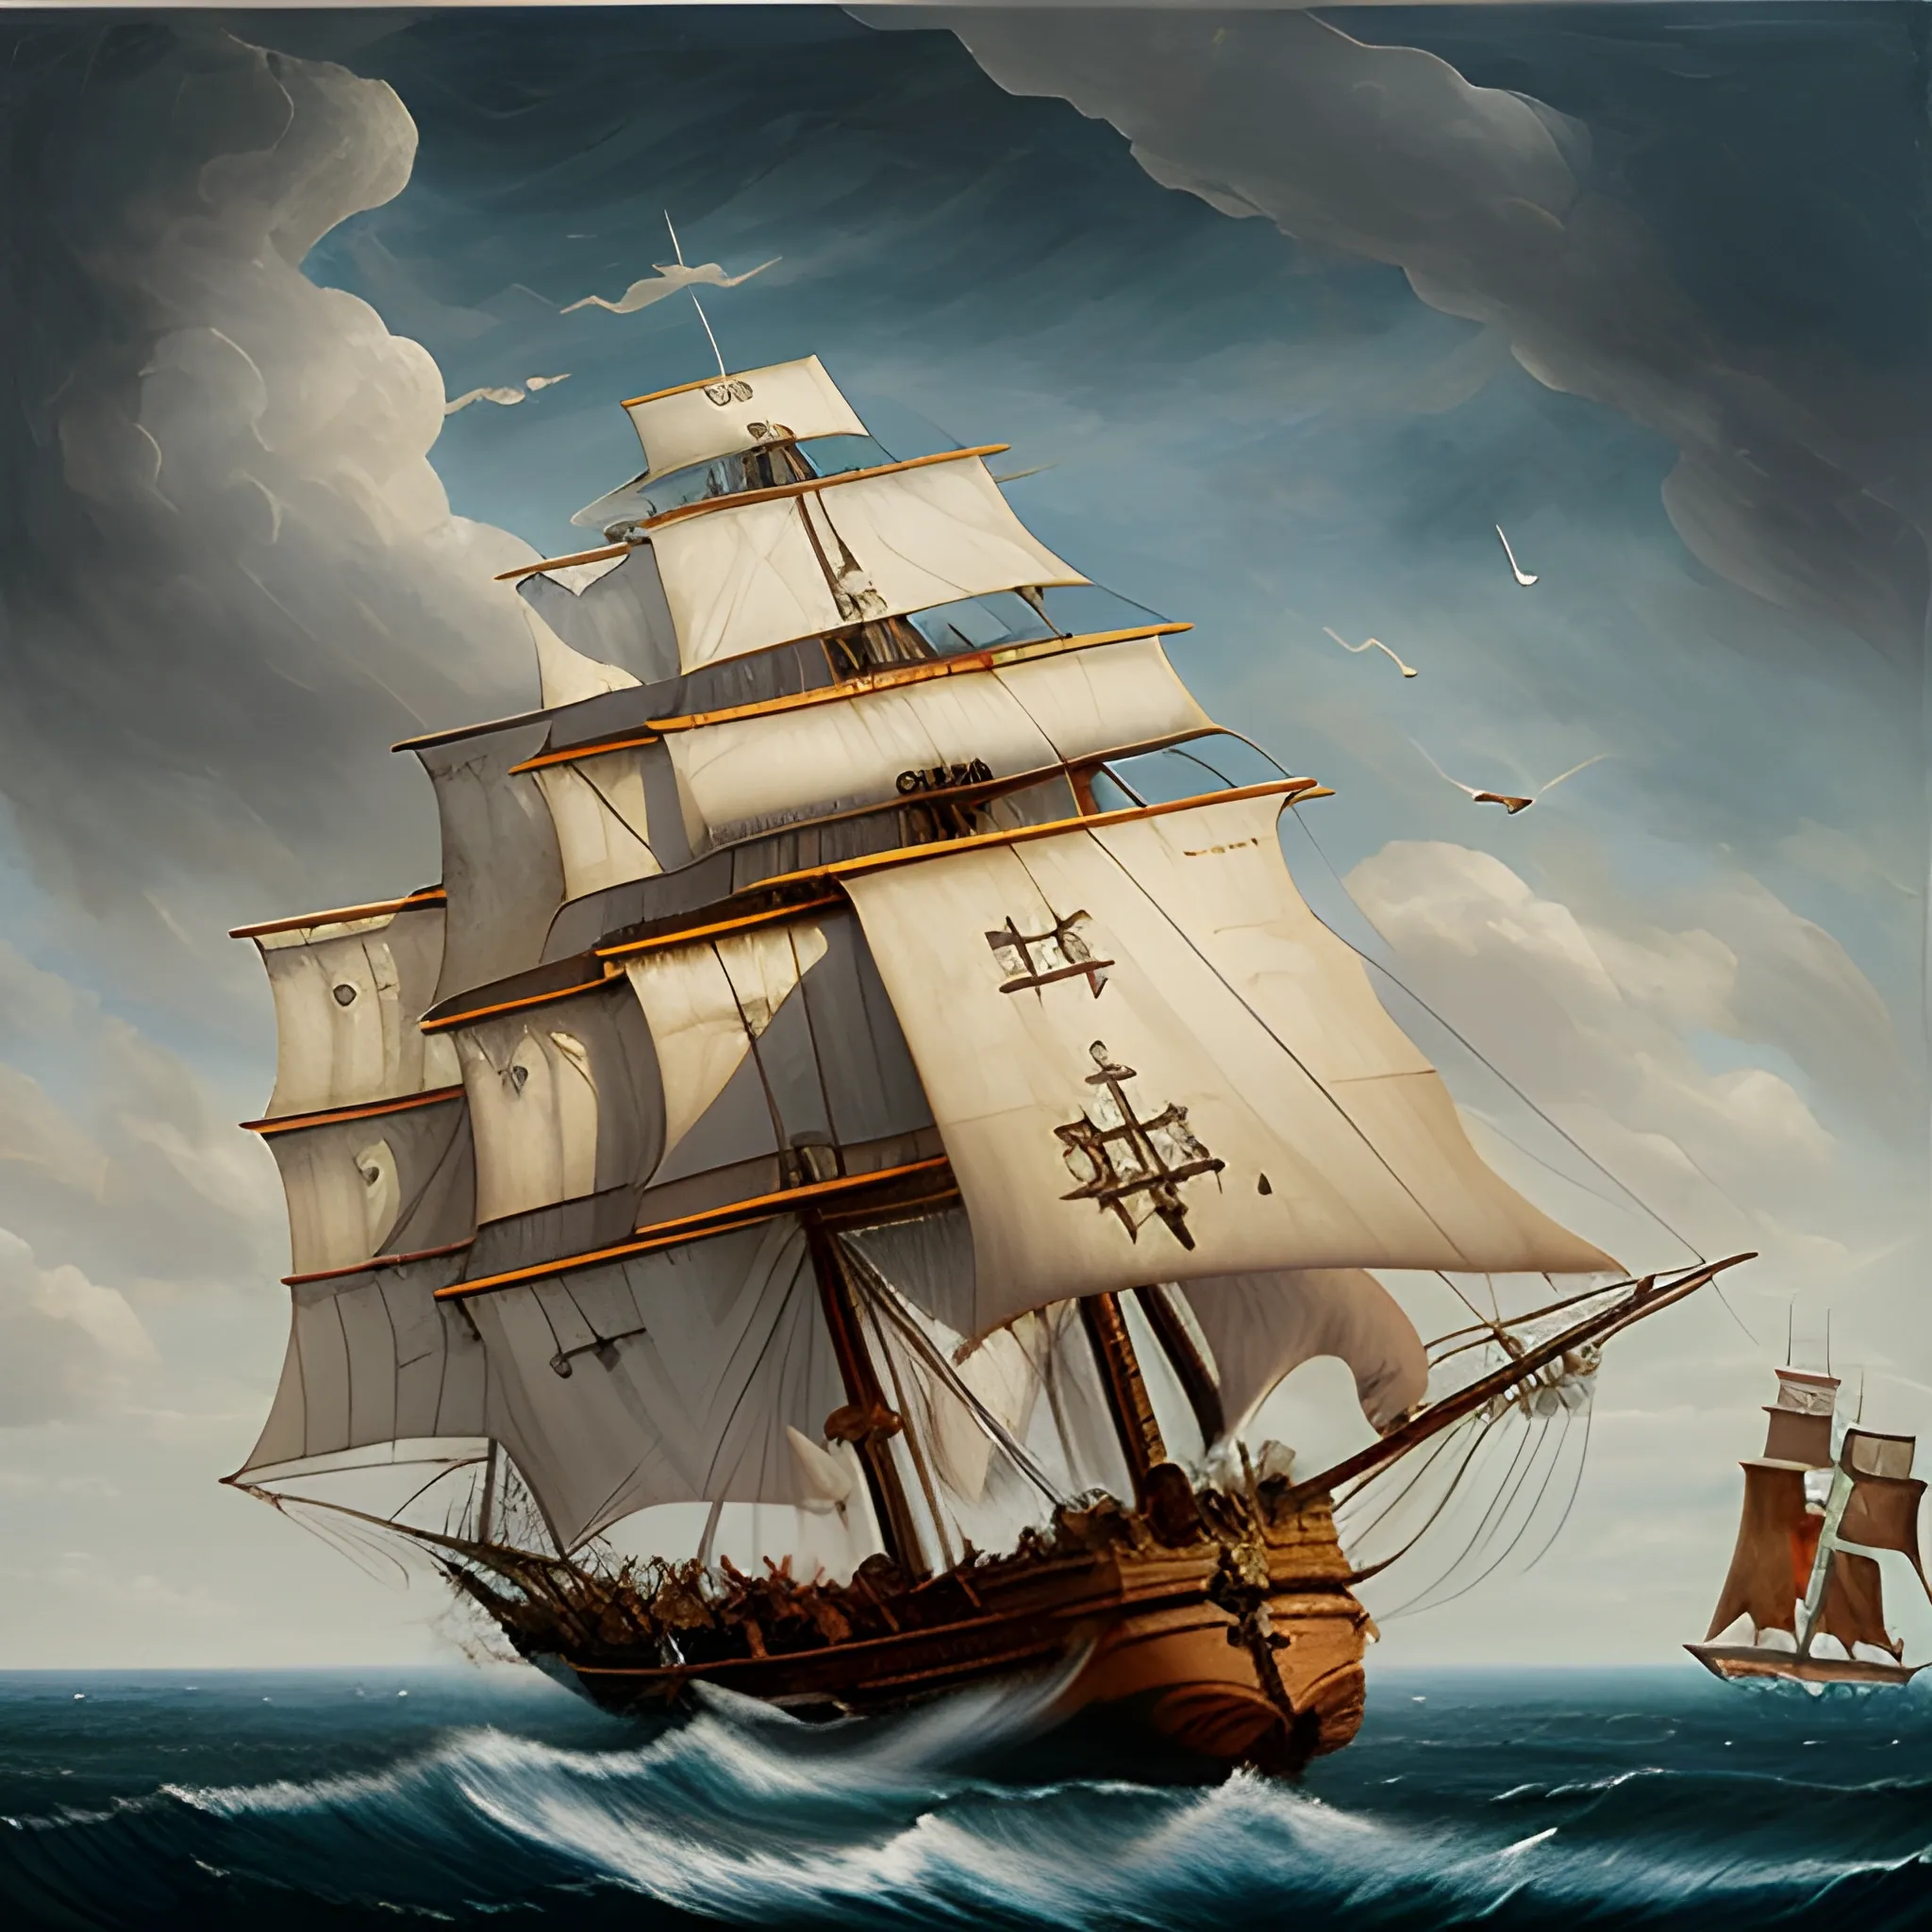 A large pirate ship sailing with sails blown in the wind, open sea, clear sky, seagulls, side view, Rule of Thirds, art Jem, oil painting, chiaroscuro lighting